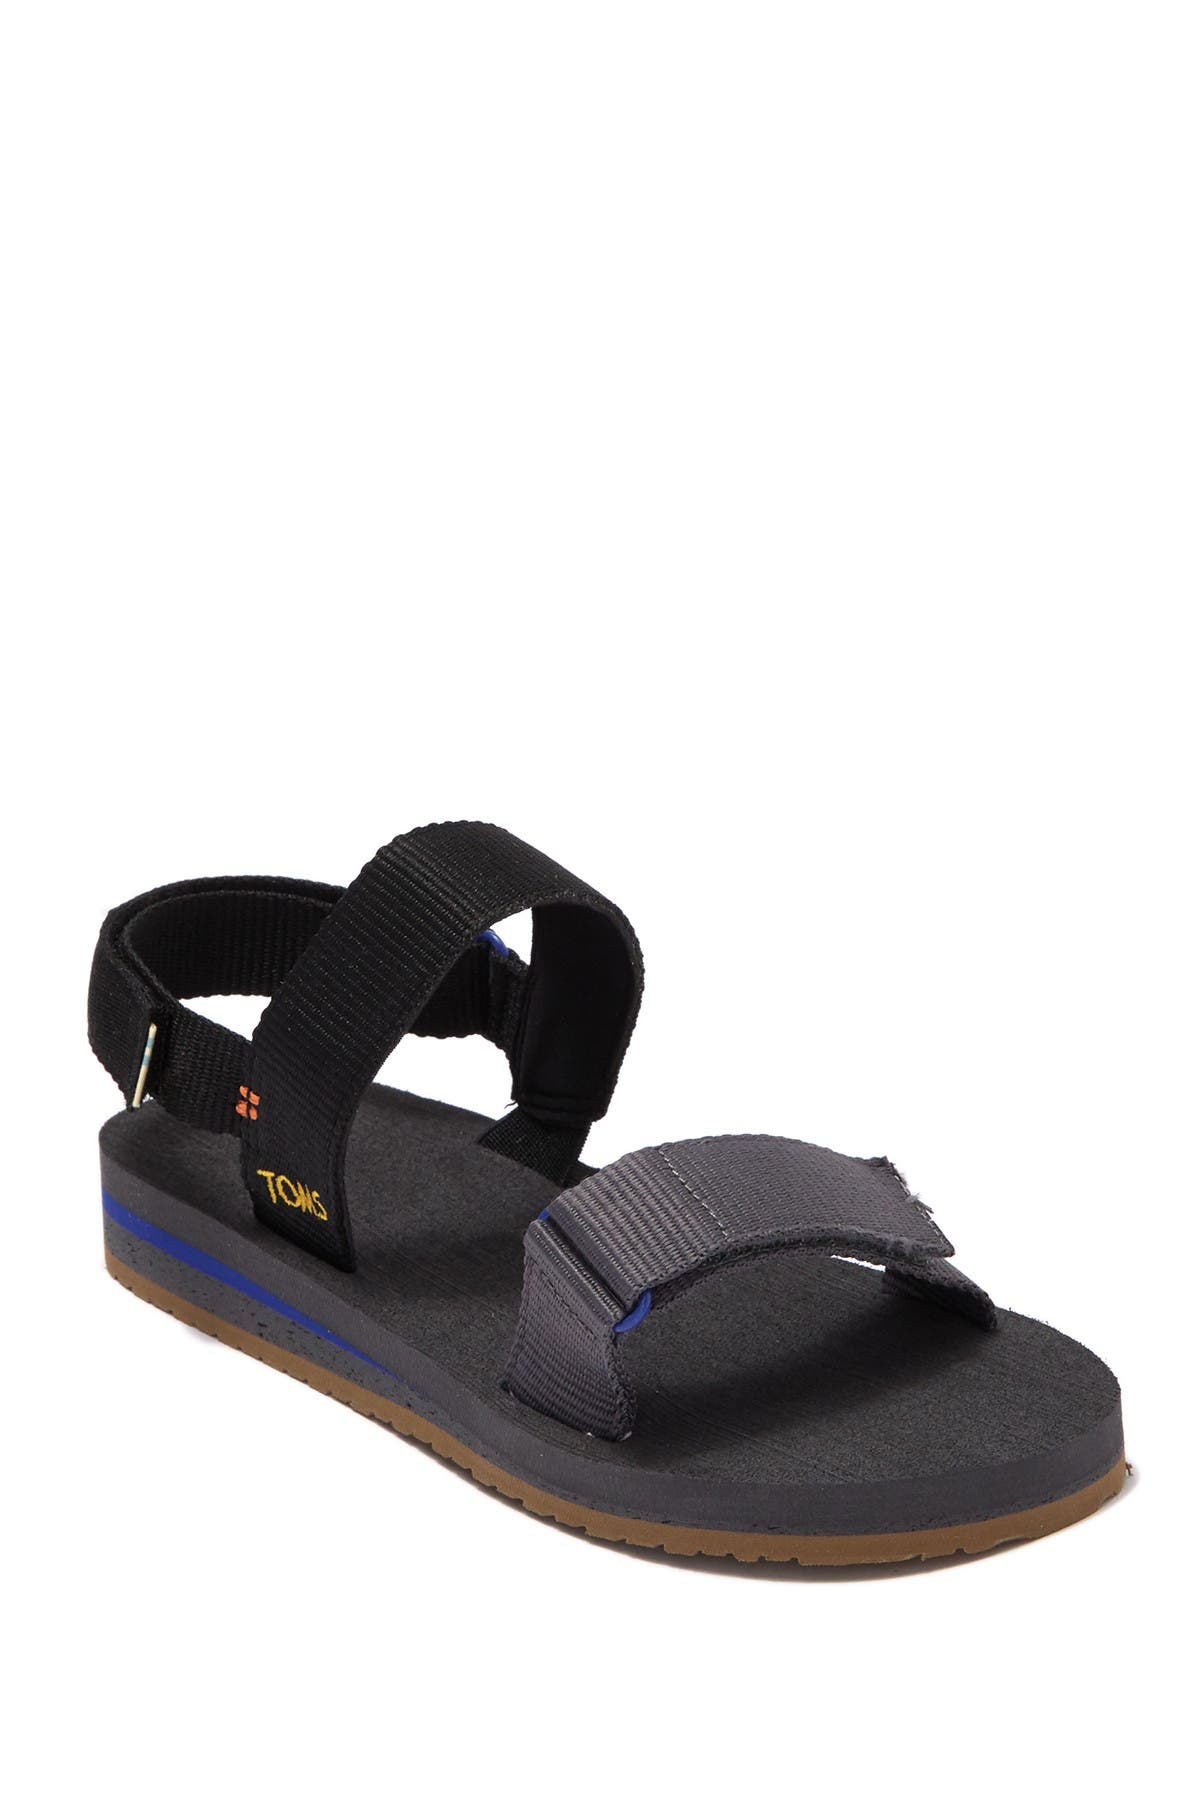 toms ray sandals